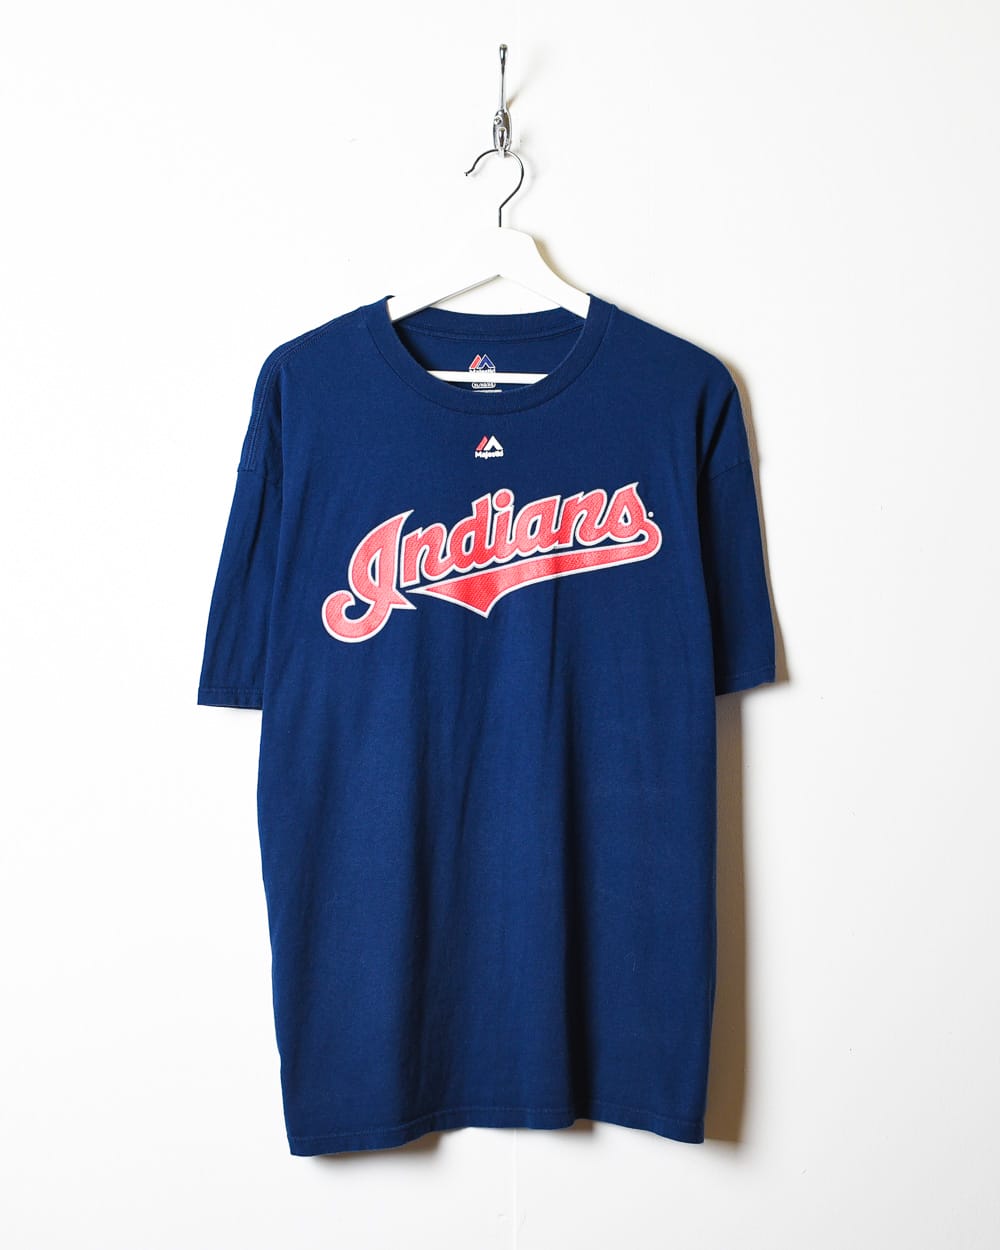 Russell Athletic, Shirts, Cleveland Indians Mlb Vintage 9s Russell  Athletic Tag Size M